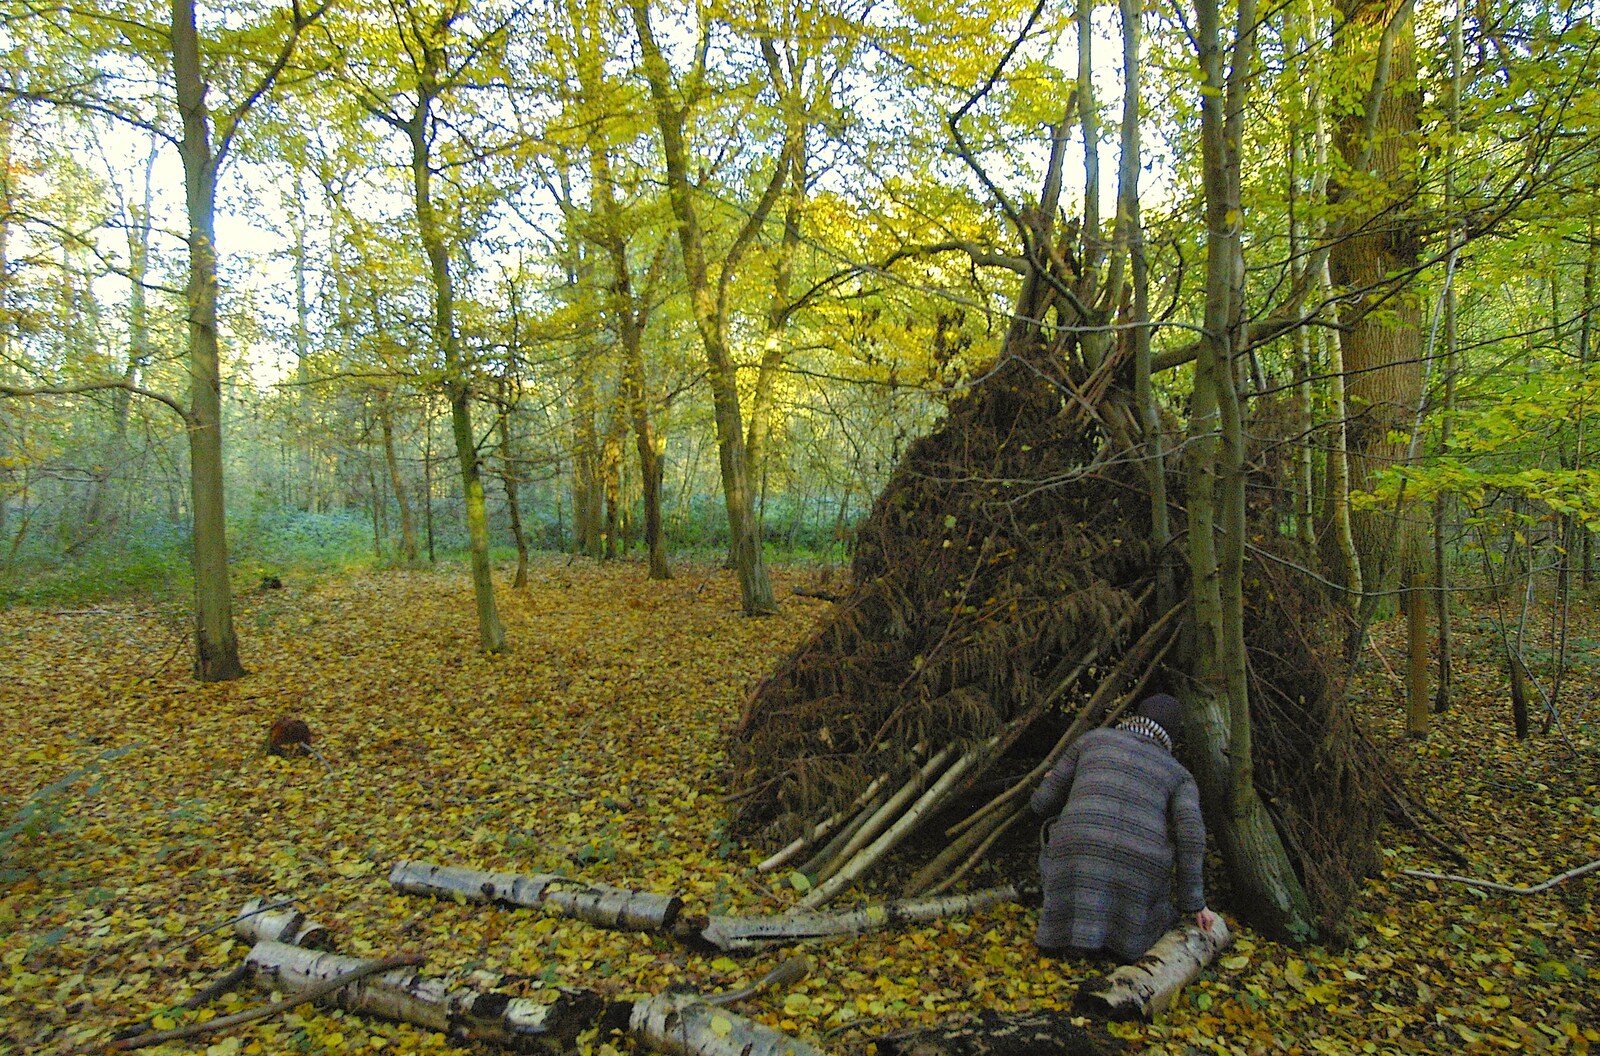 We discover a Ray Mears-style den in the woods from Evidence of Autumn: Thornham Walks, Suffolk - 18th November 2006